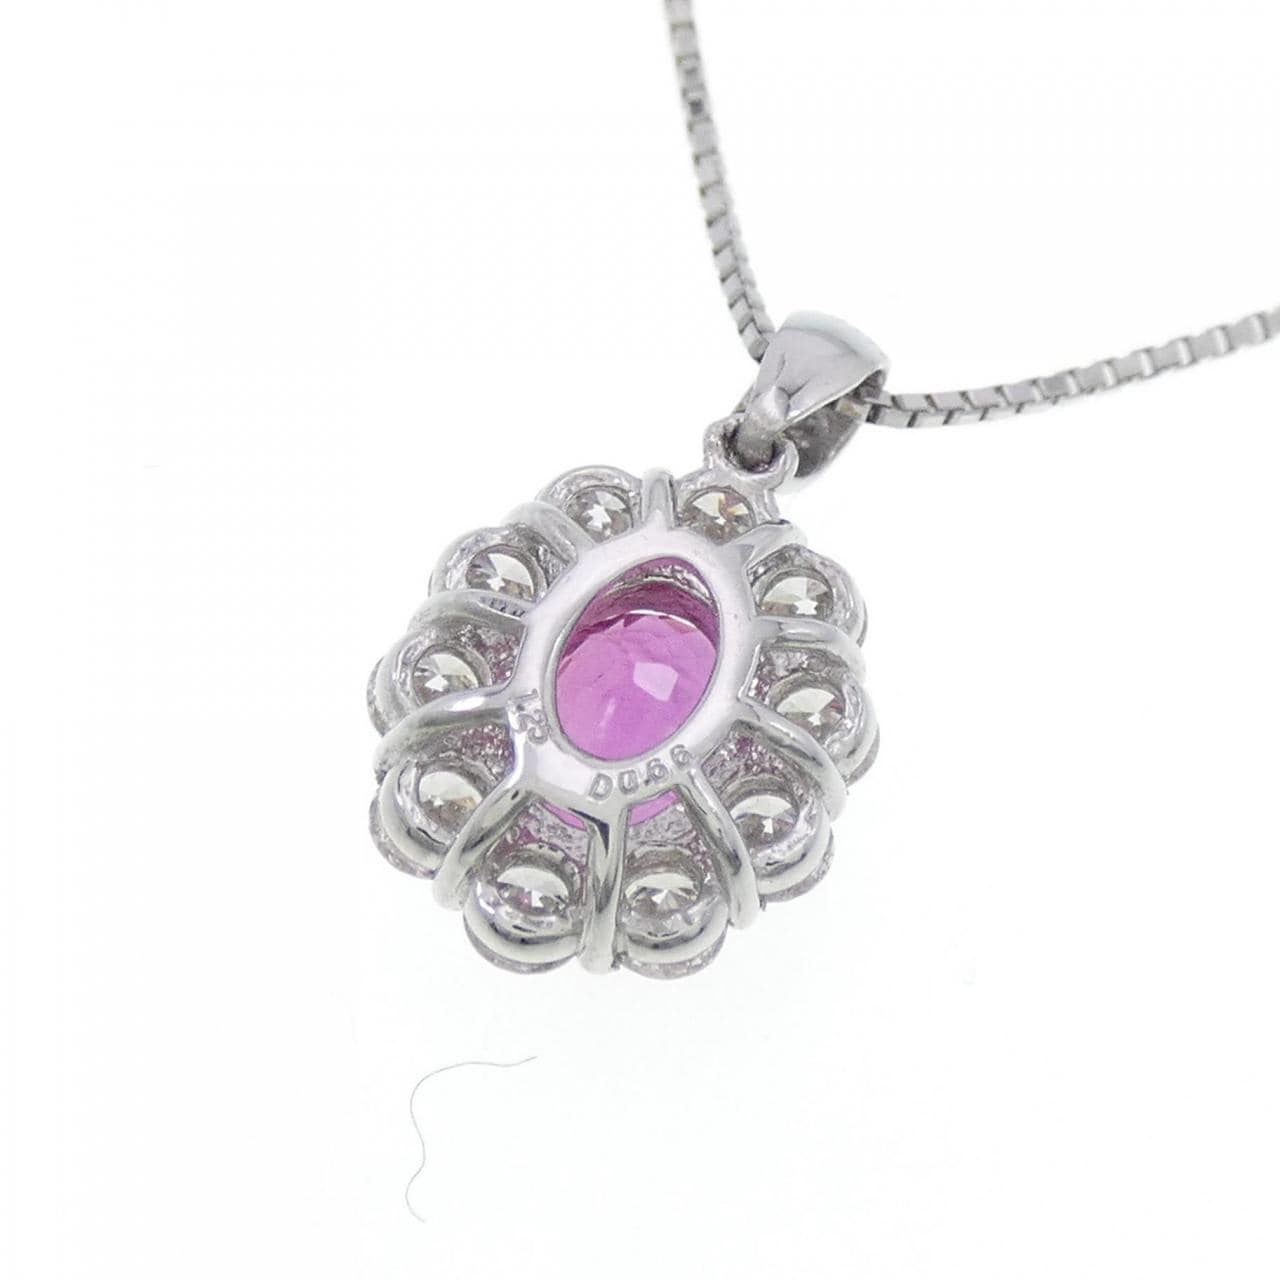 [Remake] PT Ruby Necklace 1.25CT Made in Thailand